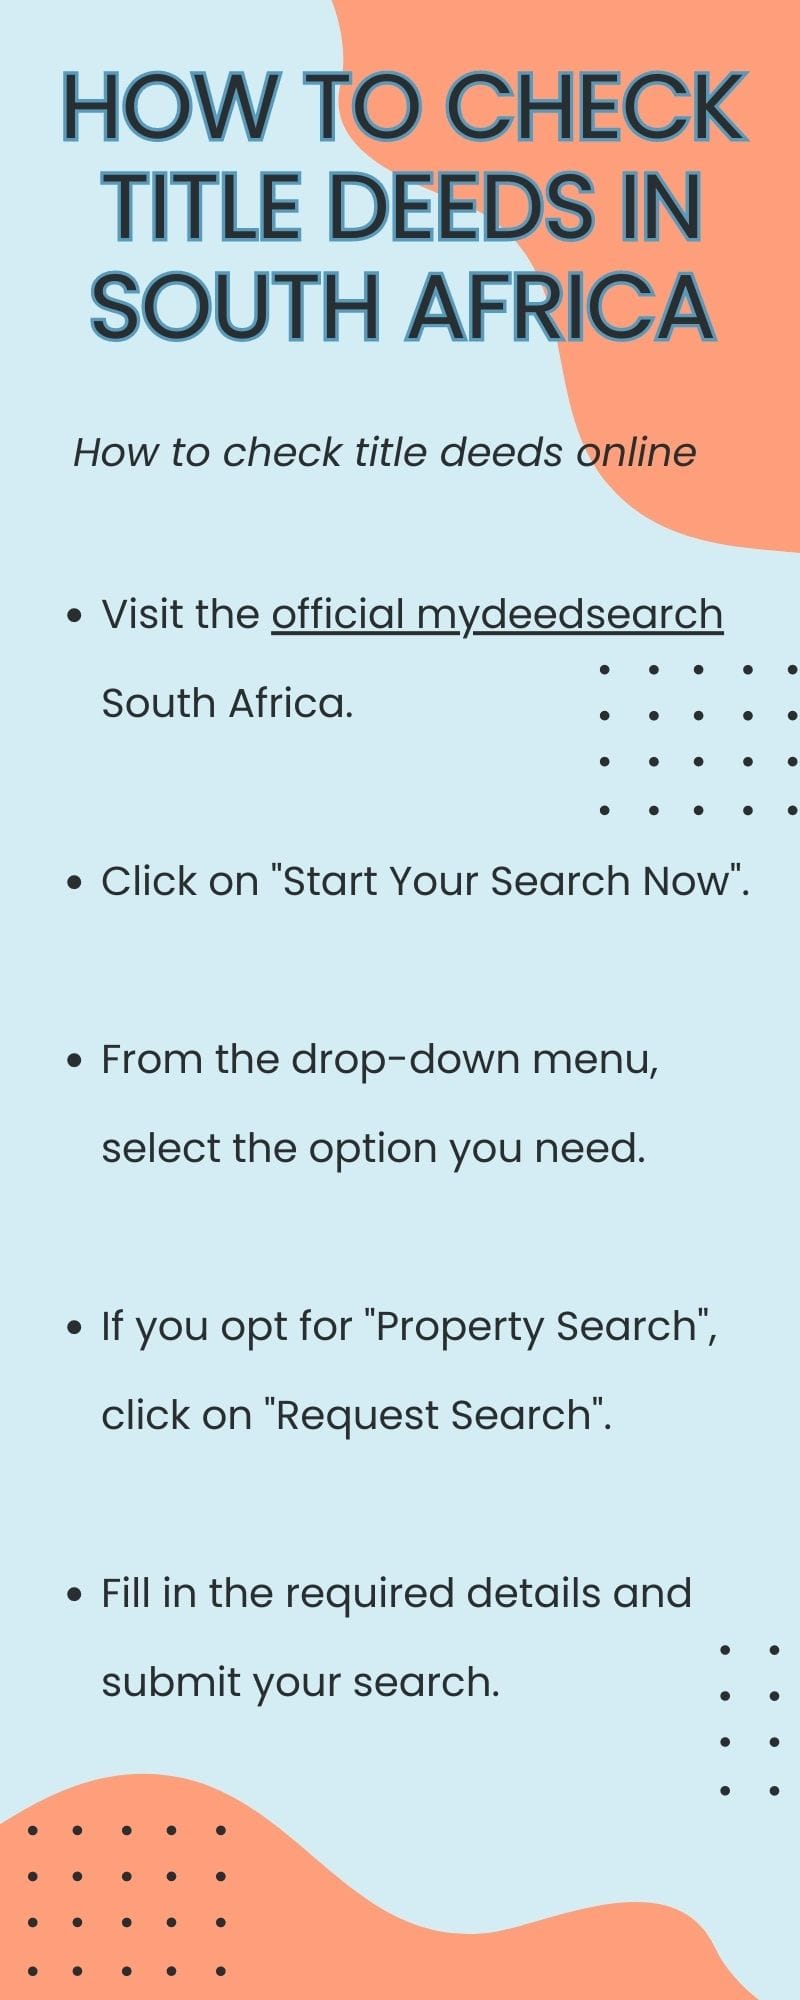 How to check title deeds in South Africa